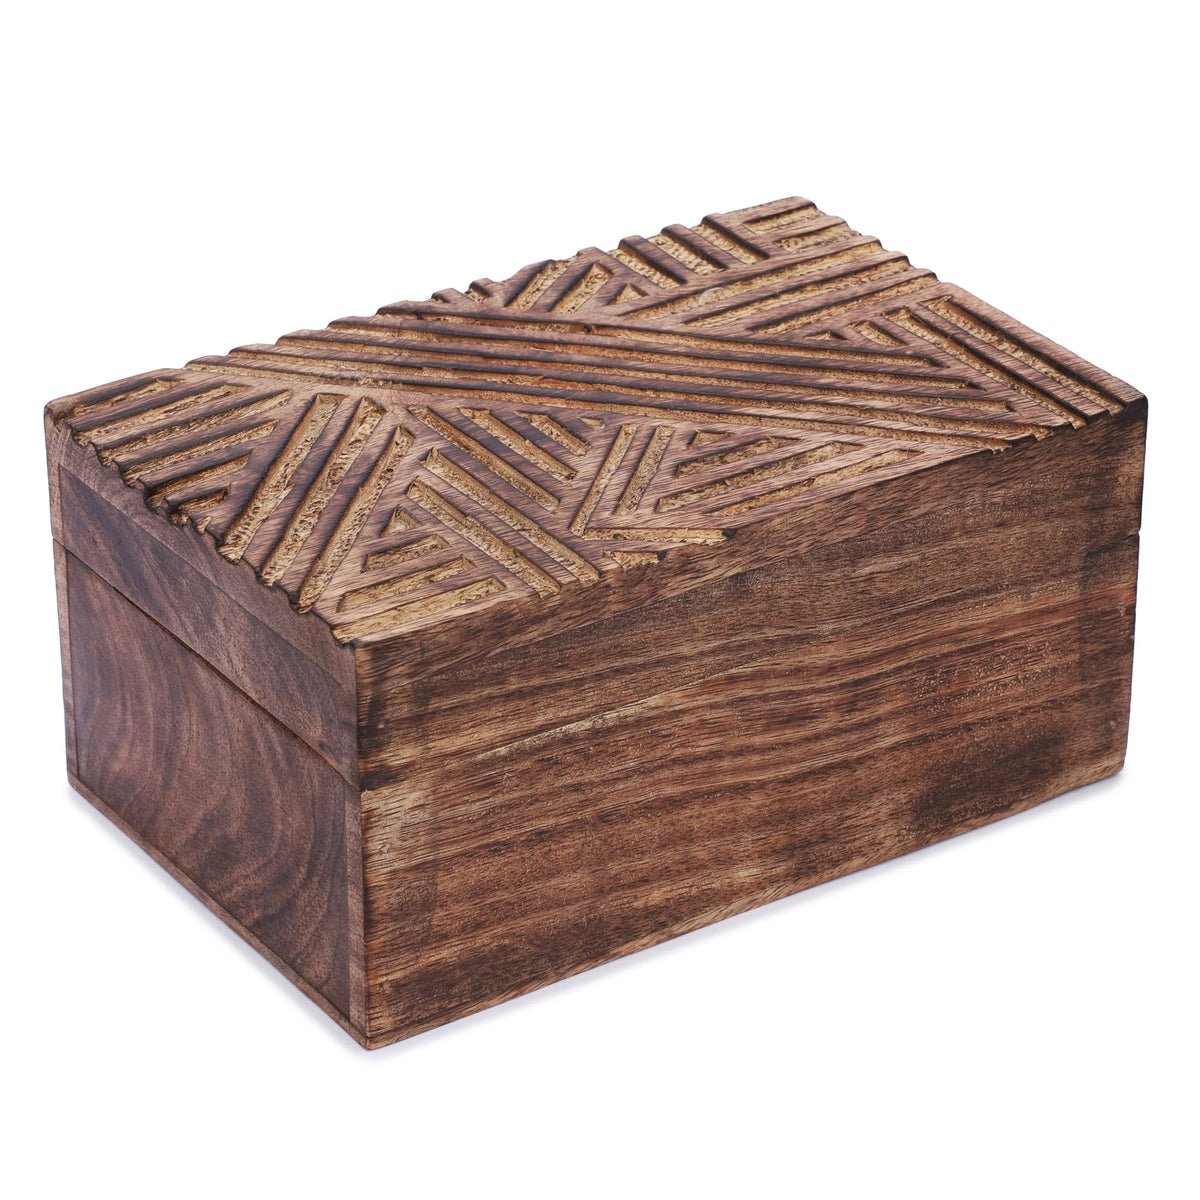 Ajuny Wooden Hand Carving Decorative Jewelry Box Line Design Trinket Chest Keepsake Multipurpose Jewellery Storage Organizer Antique Vintage Accessories Holder Boxes Great for Gifts